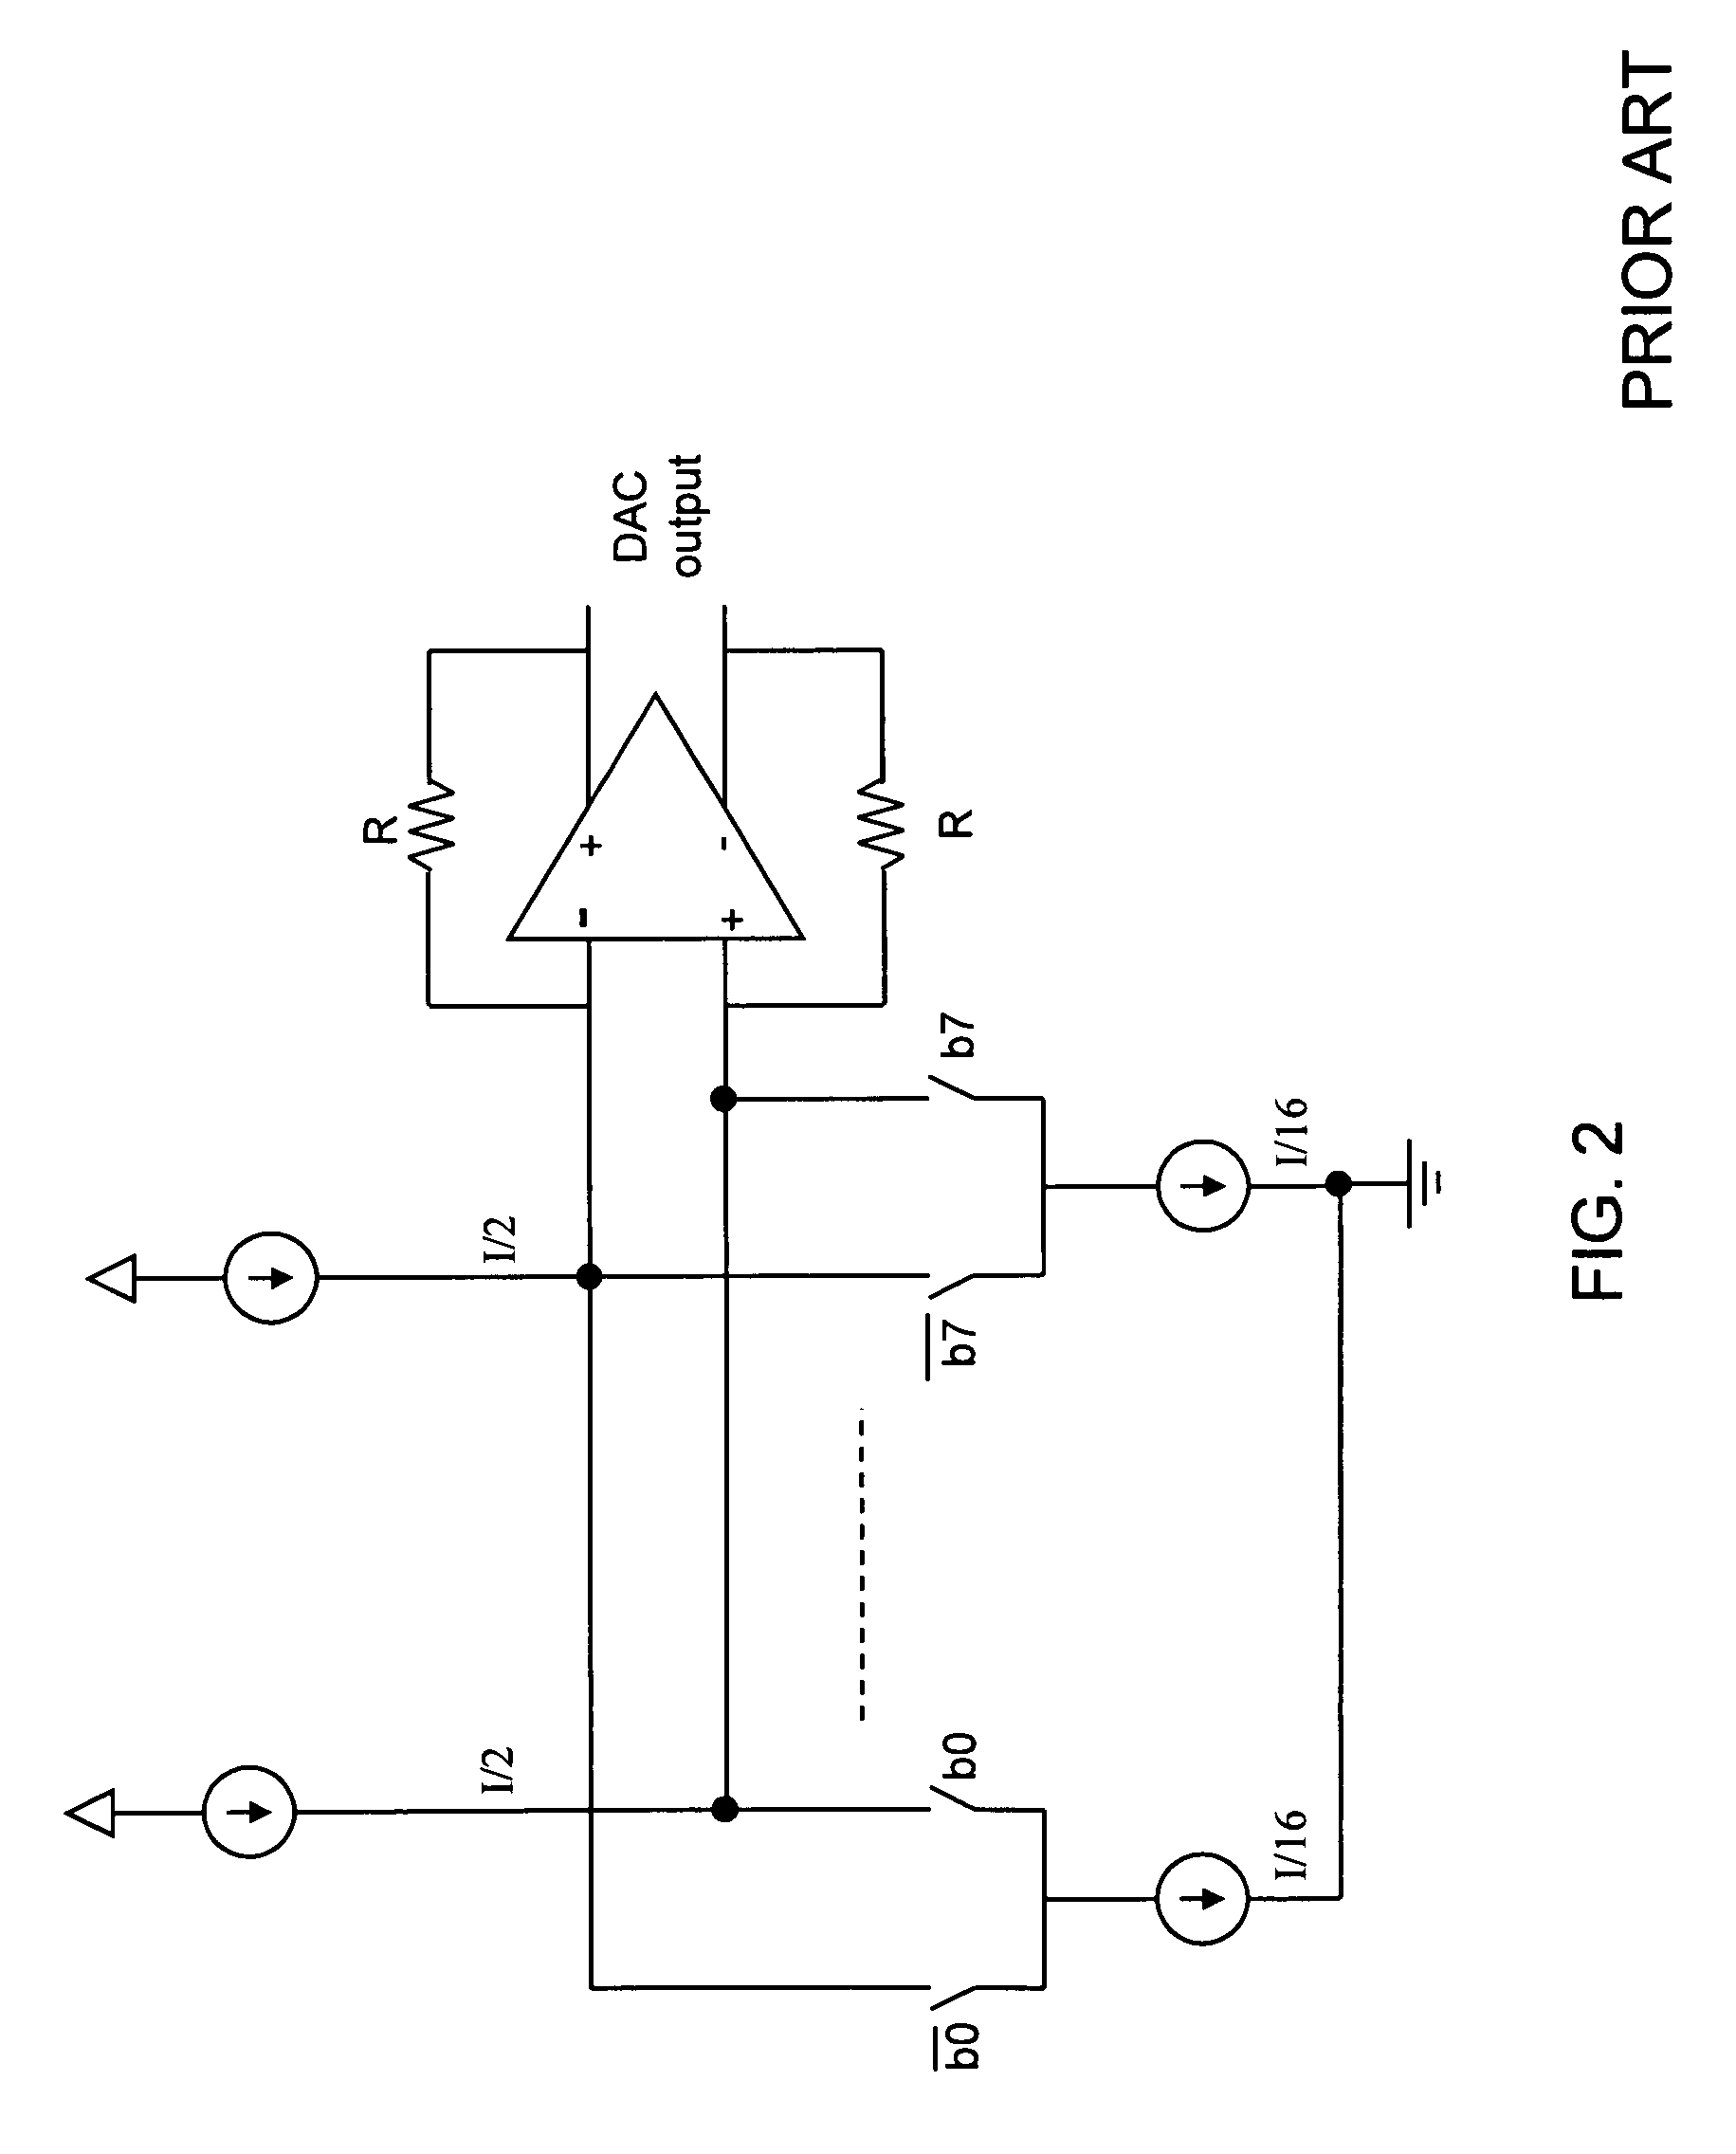 System and method for area-efficient three-level dynamic element matching